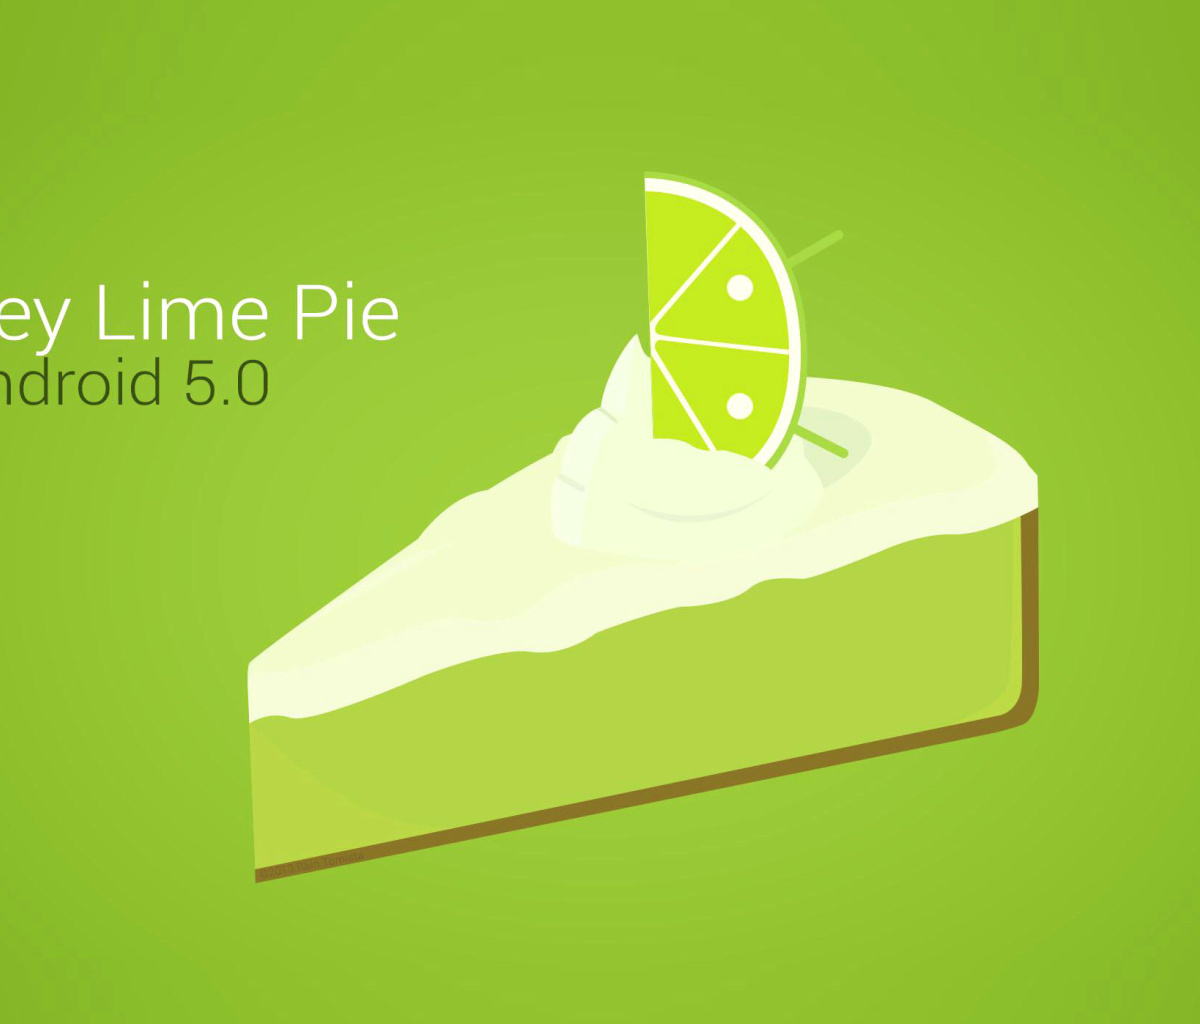 Concept Android 5.0 Key Lime Pie screenshot #1 1200x1024